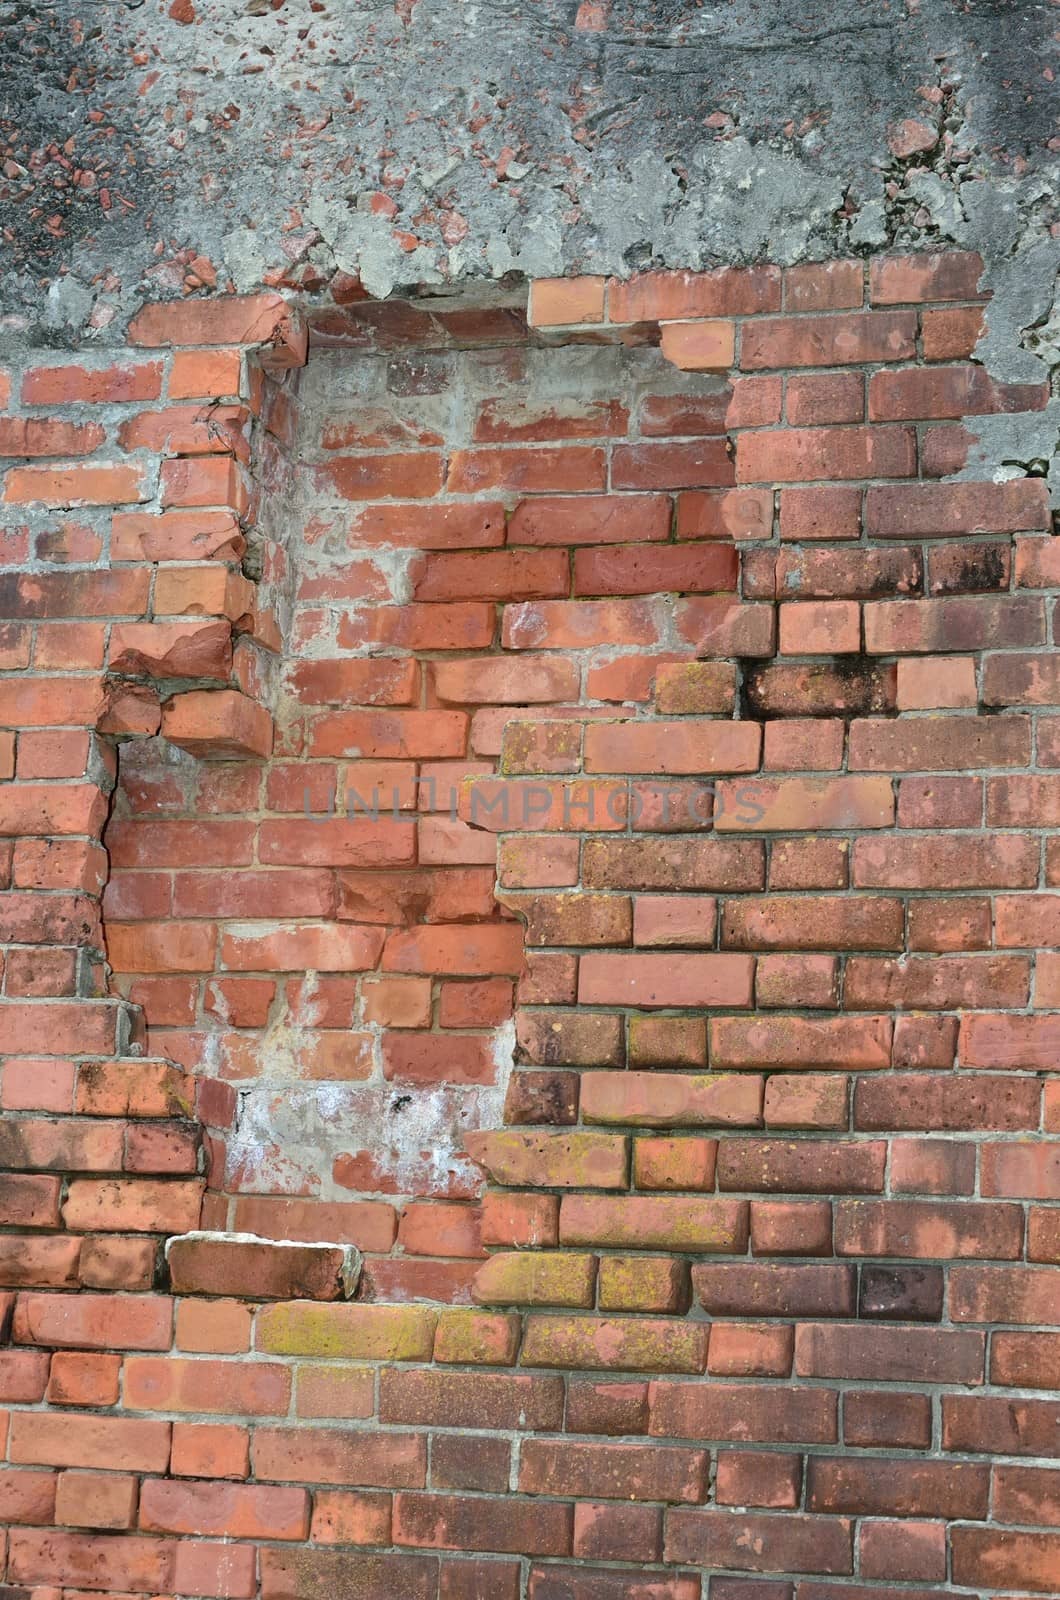 One layer of two layers of brick beginning to fall out in an old fort wall